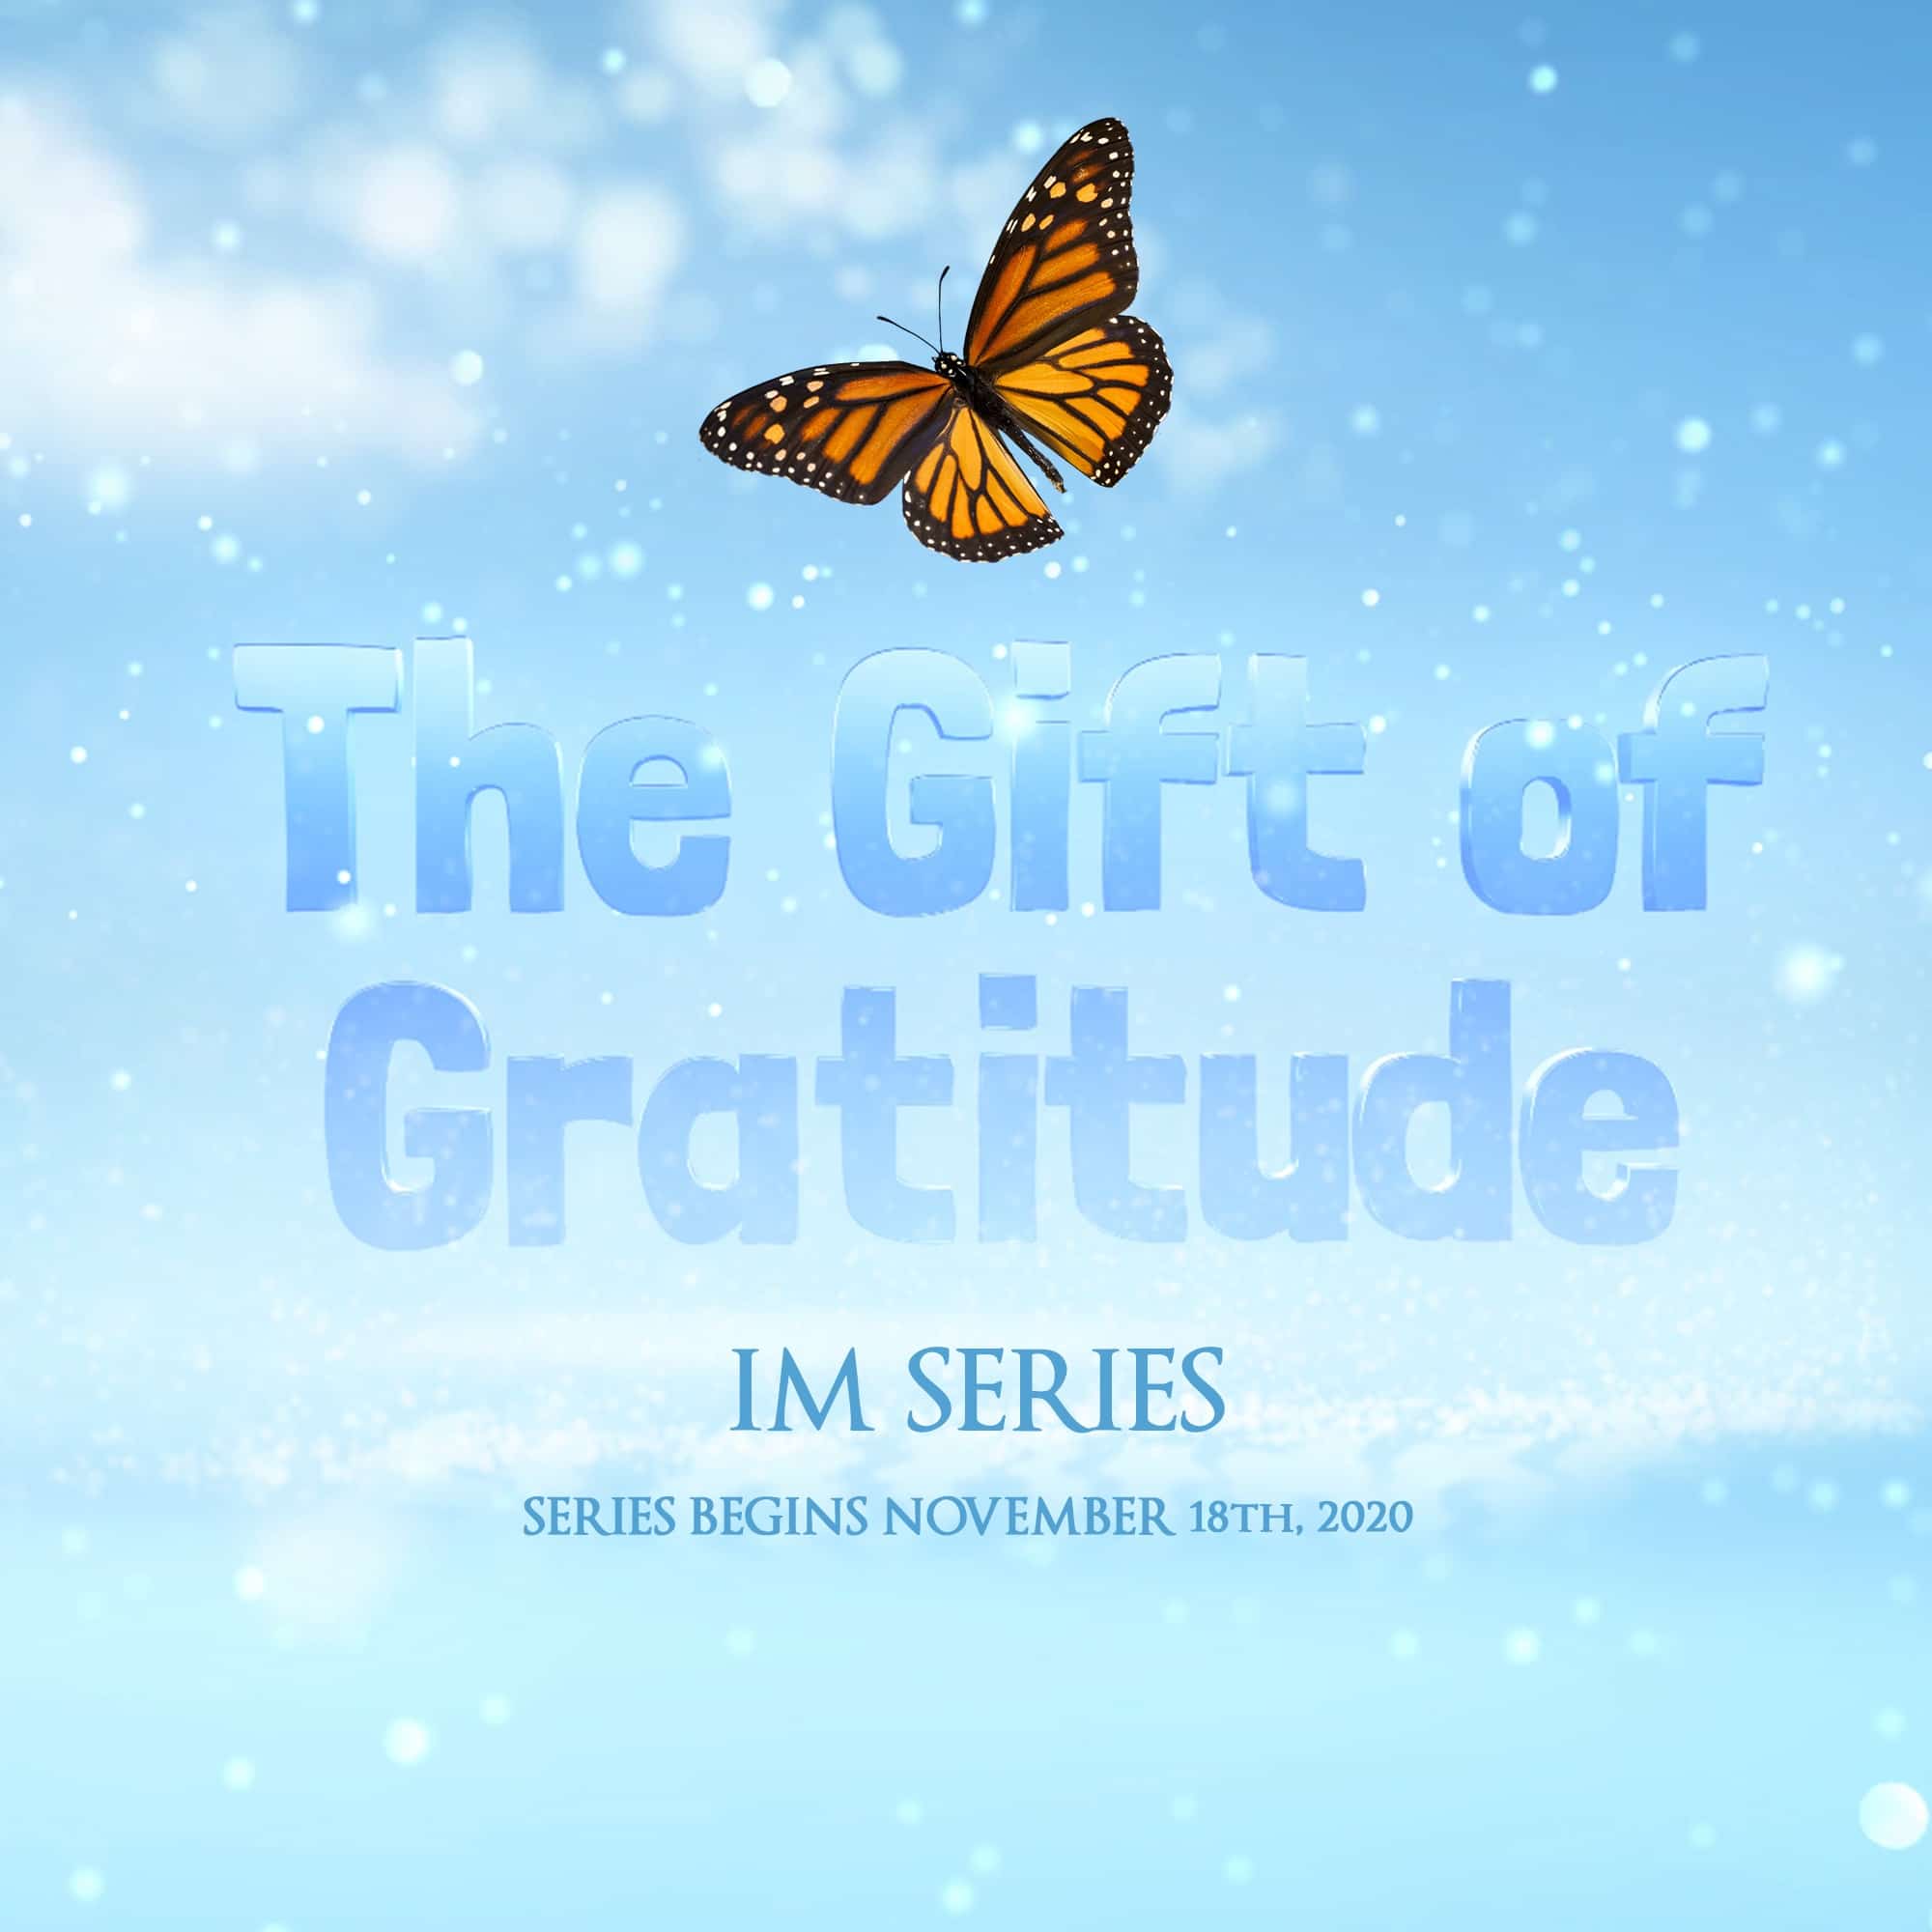 The Gift of Gratitude IM Series. We take a look at the layers of inherent power and freedom accessible through an active and intentional pursuit of harnessing gratitude. Don’t miss this powerful series that walks you up to and through the doorway of co-creating with the Creator through receiving the gift of gratitude. #IMSeries #SuperPowerExperts #messages #ahumanresearch&developmentinstitute #thegiftofgratitude #bettertogive #thelawofattractingreciprocity #thelawofreciprocity #thelawofattraction #gift #gratitude #reciprocity #attraction #superpower #law #principle